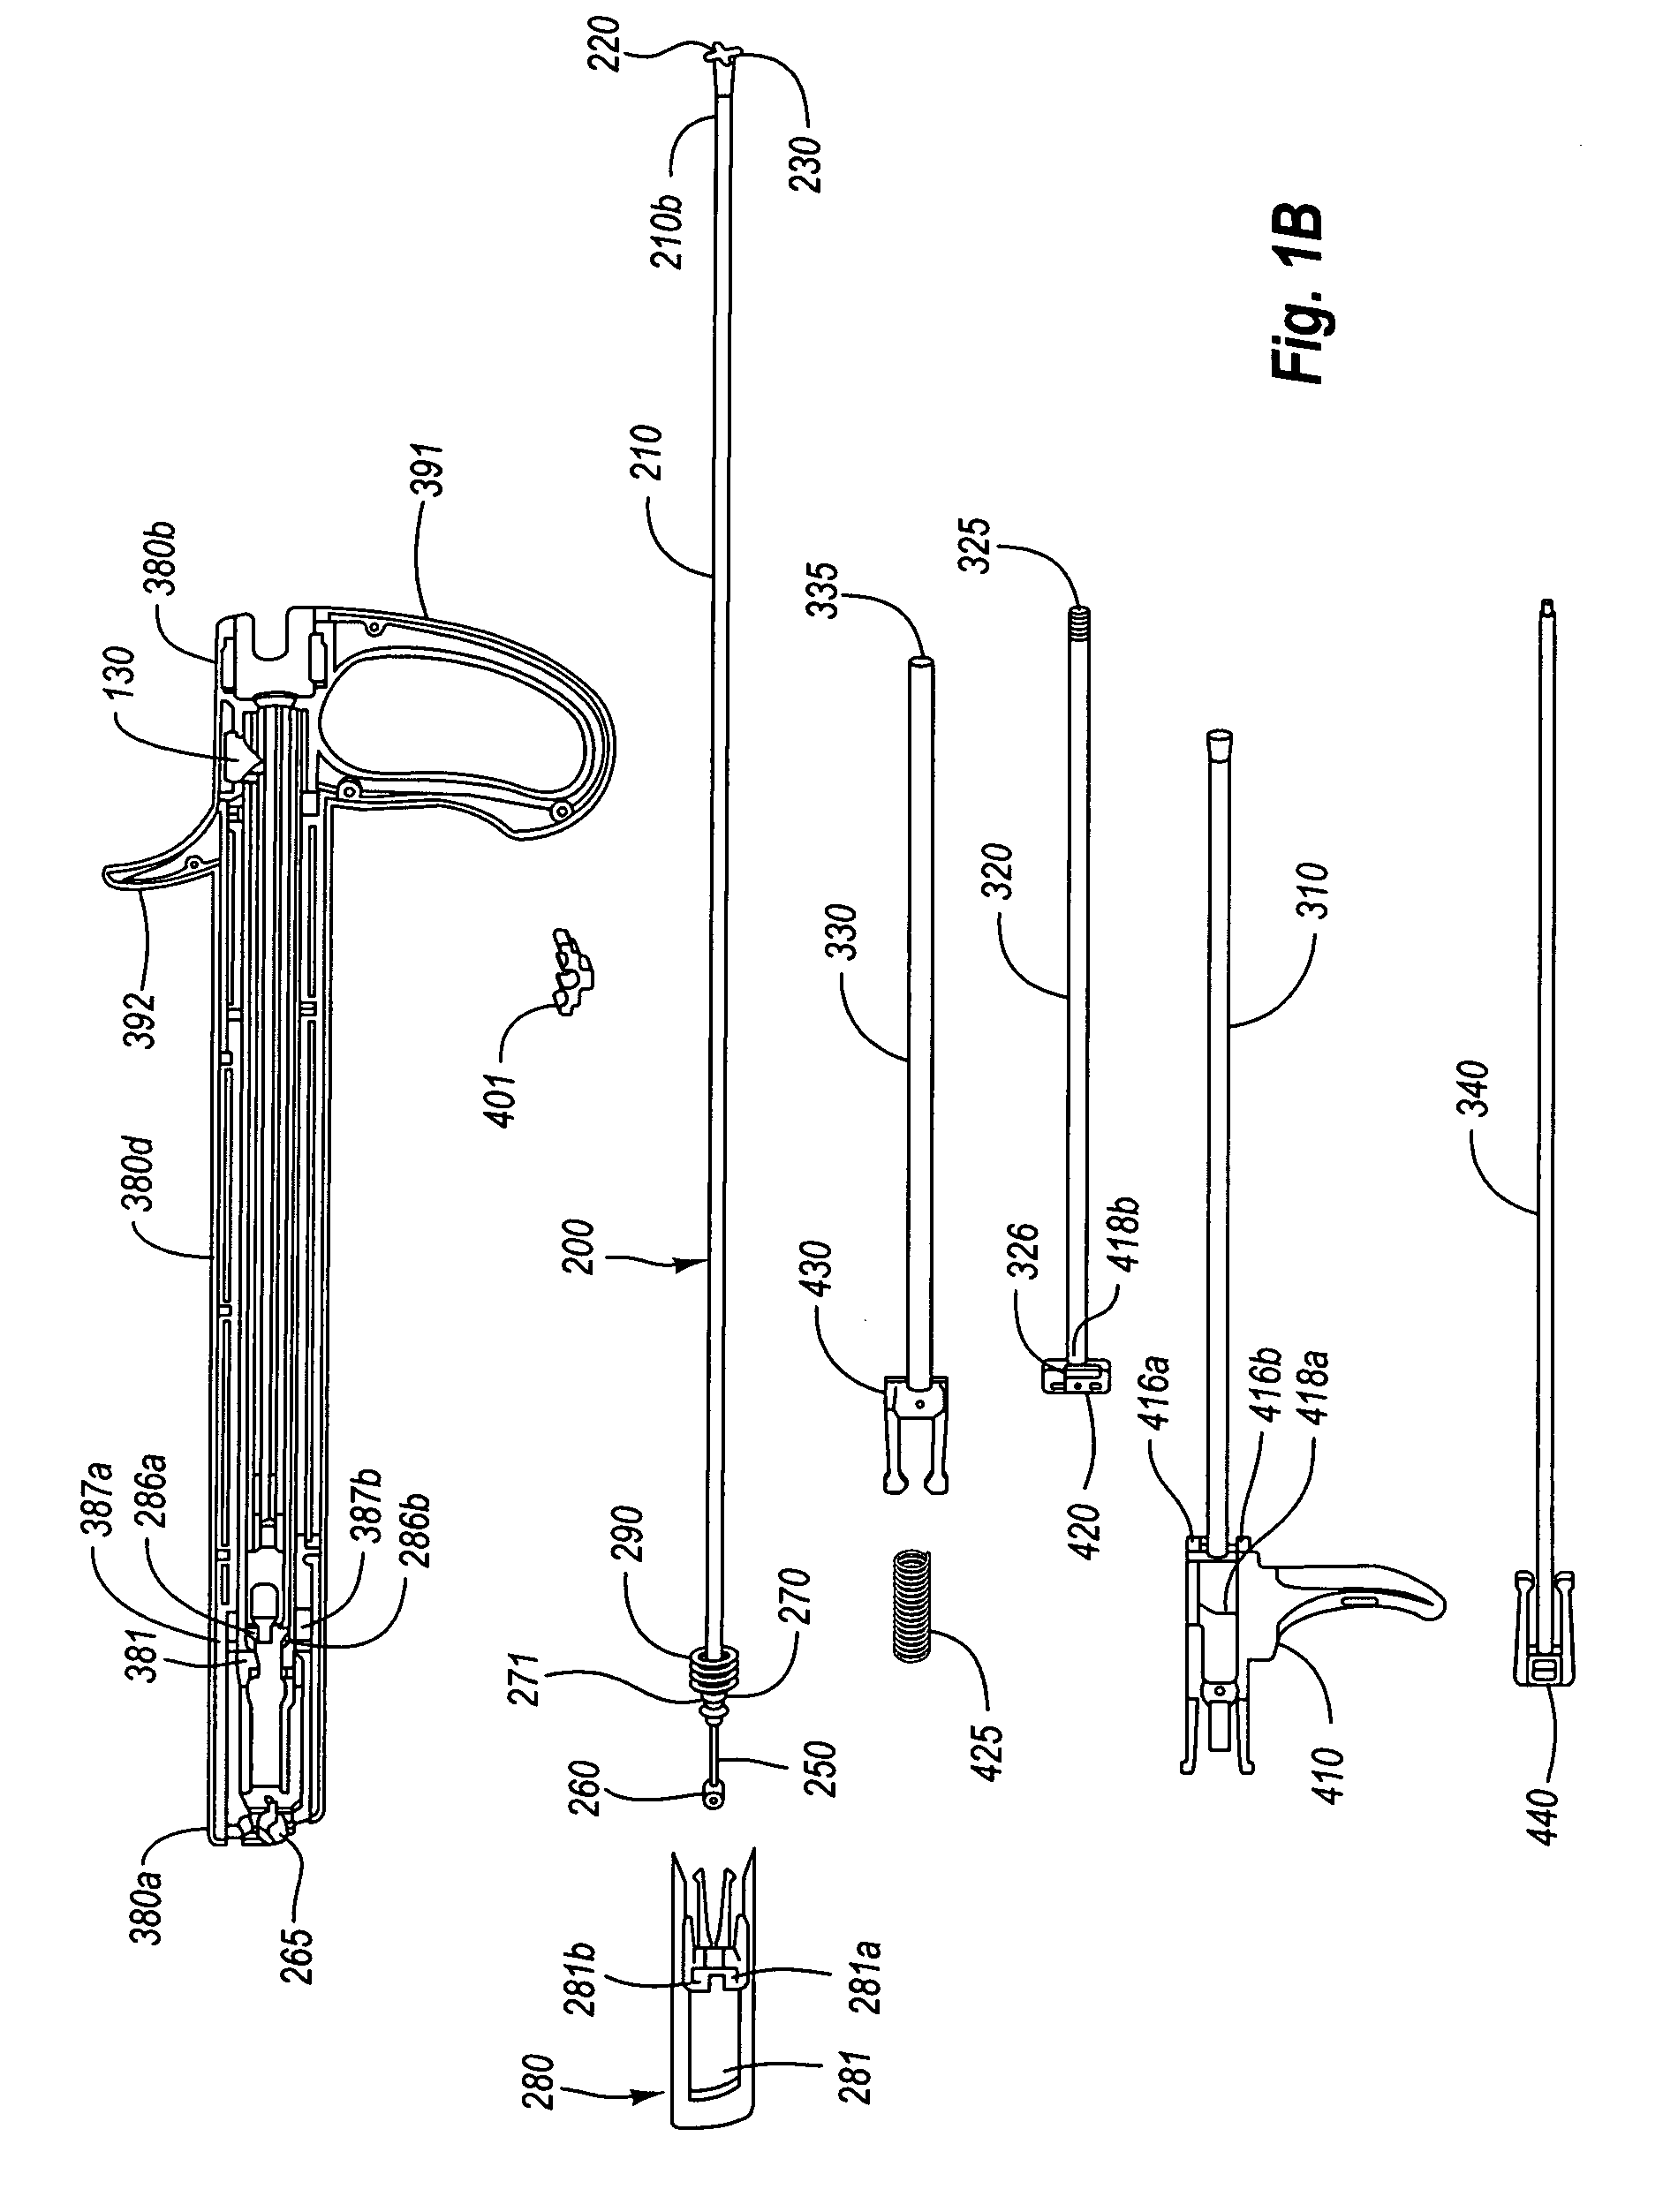 Antimicrobial closure element and closure element applier